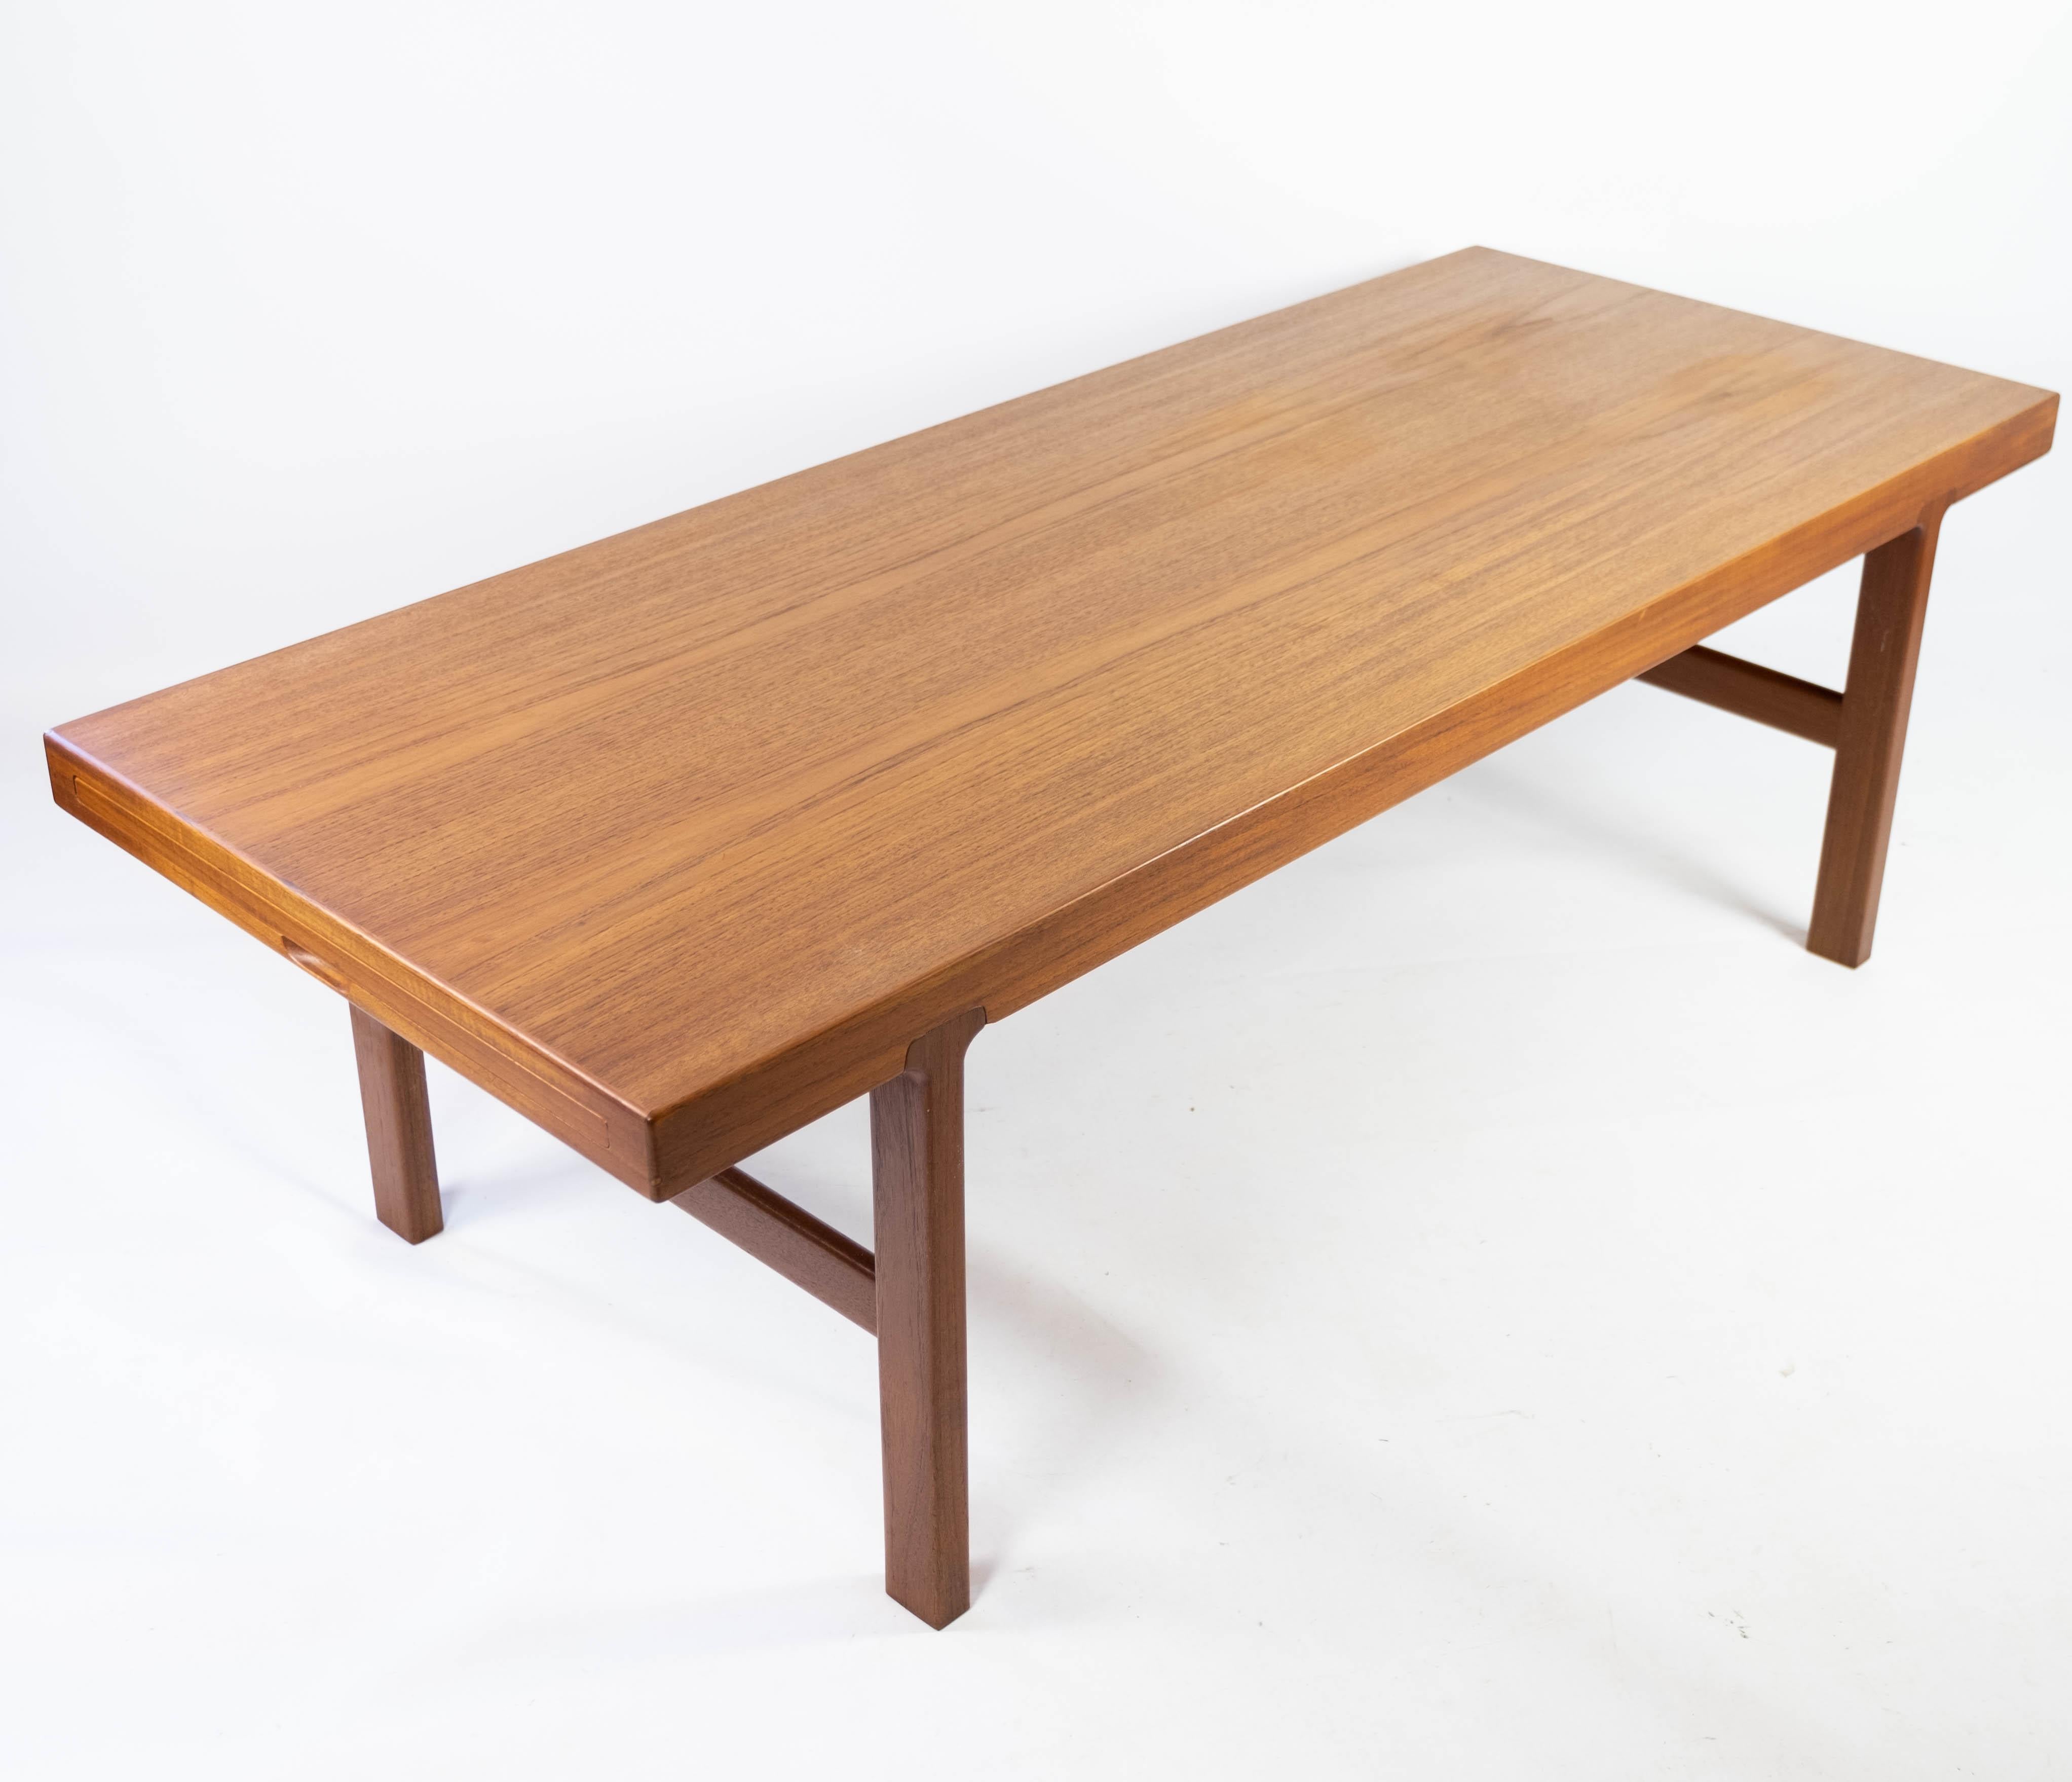 Coffee Table Made In Teak With Extension Plate, Danish Design From 1960s In Good Condition For Sale In Lejre, DK